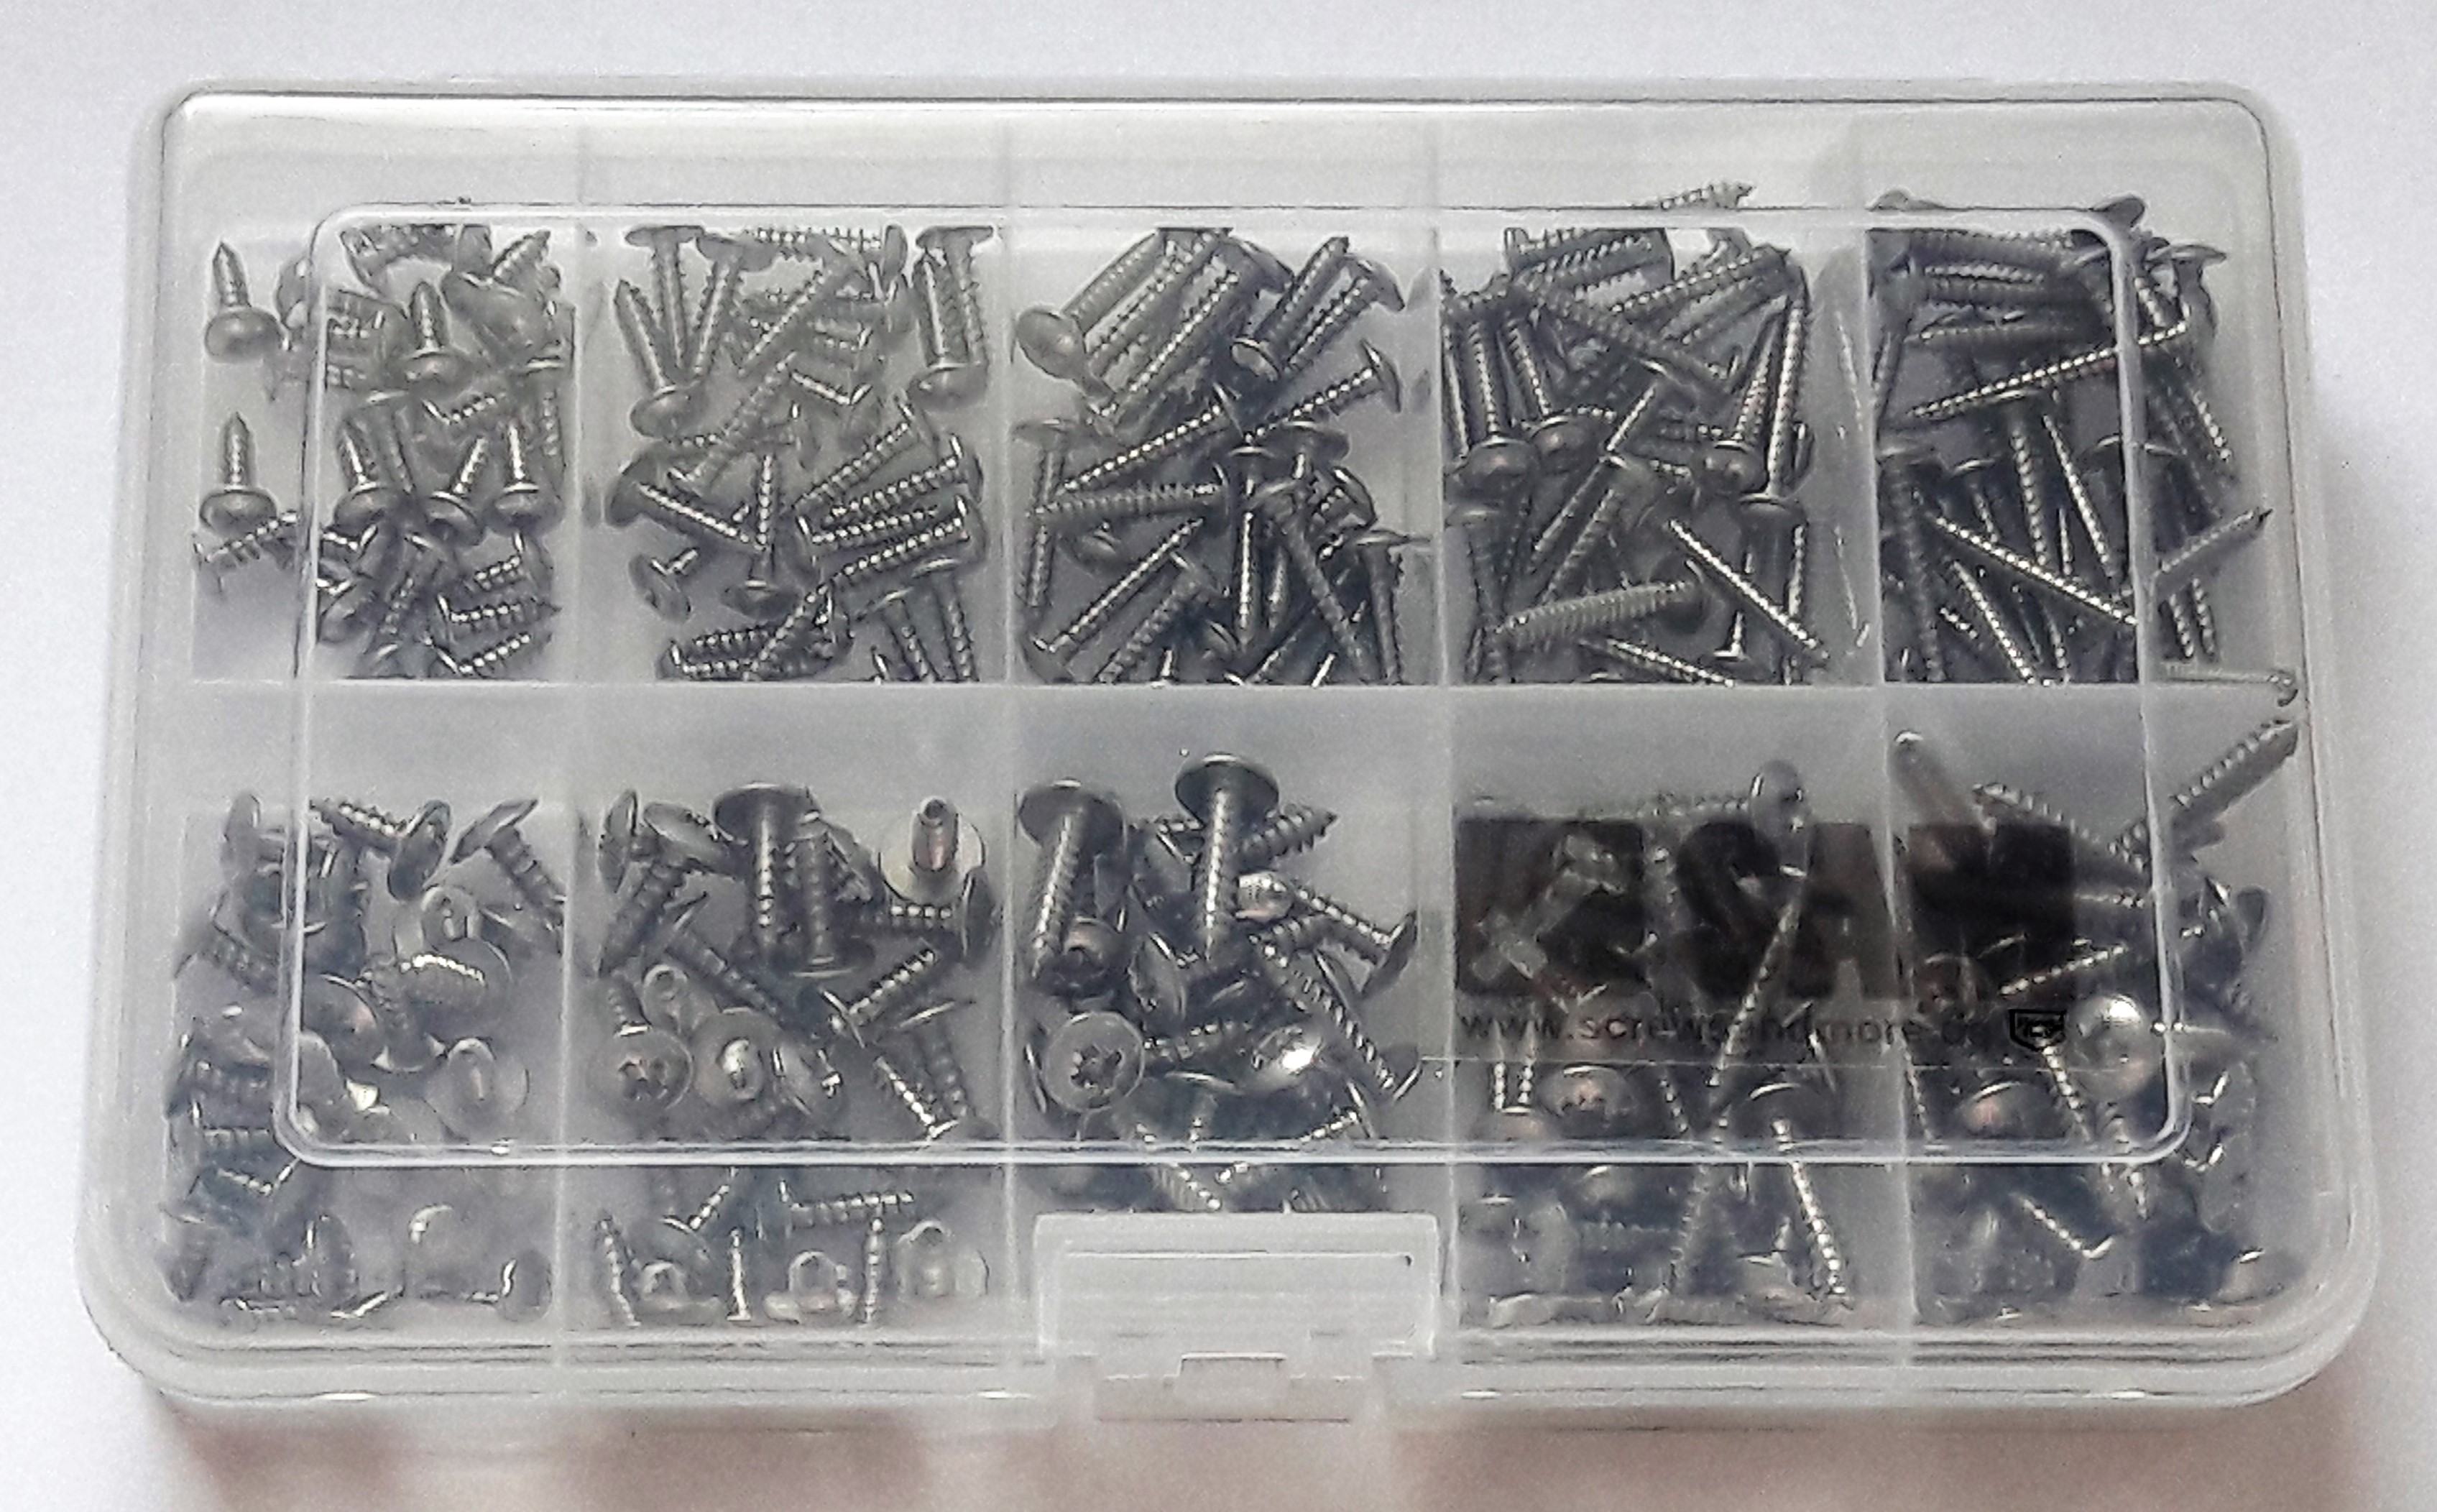 2,9/3,5 self tapping screws set 250 pcs DIN 7981 flanged A2